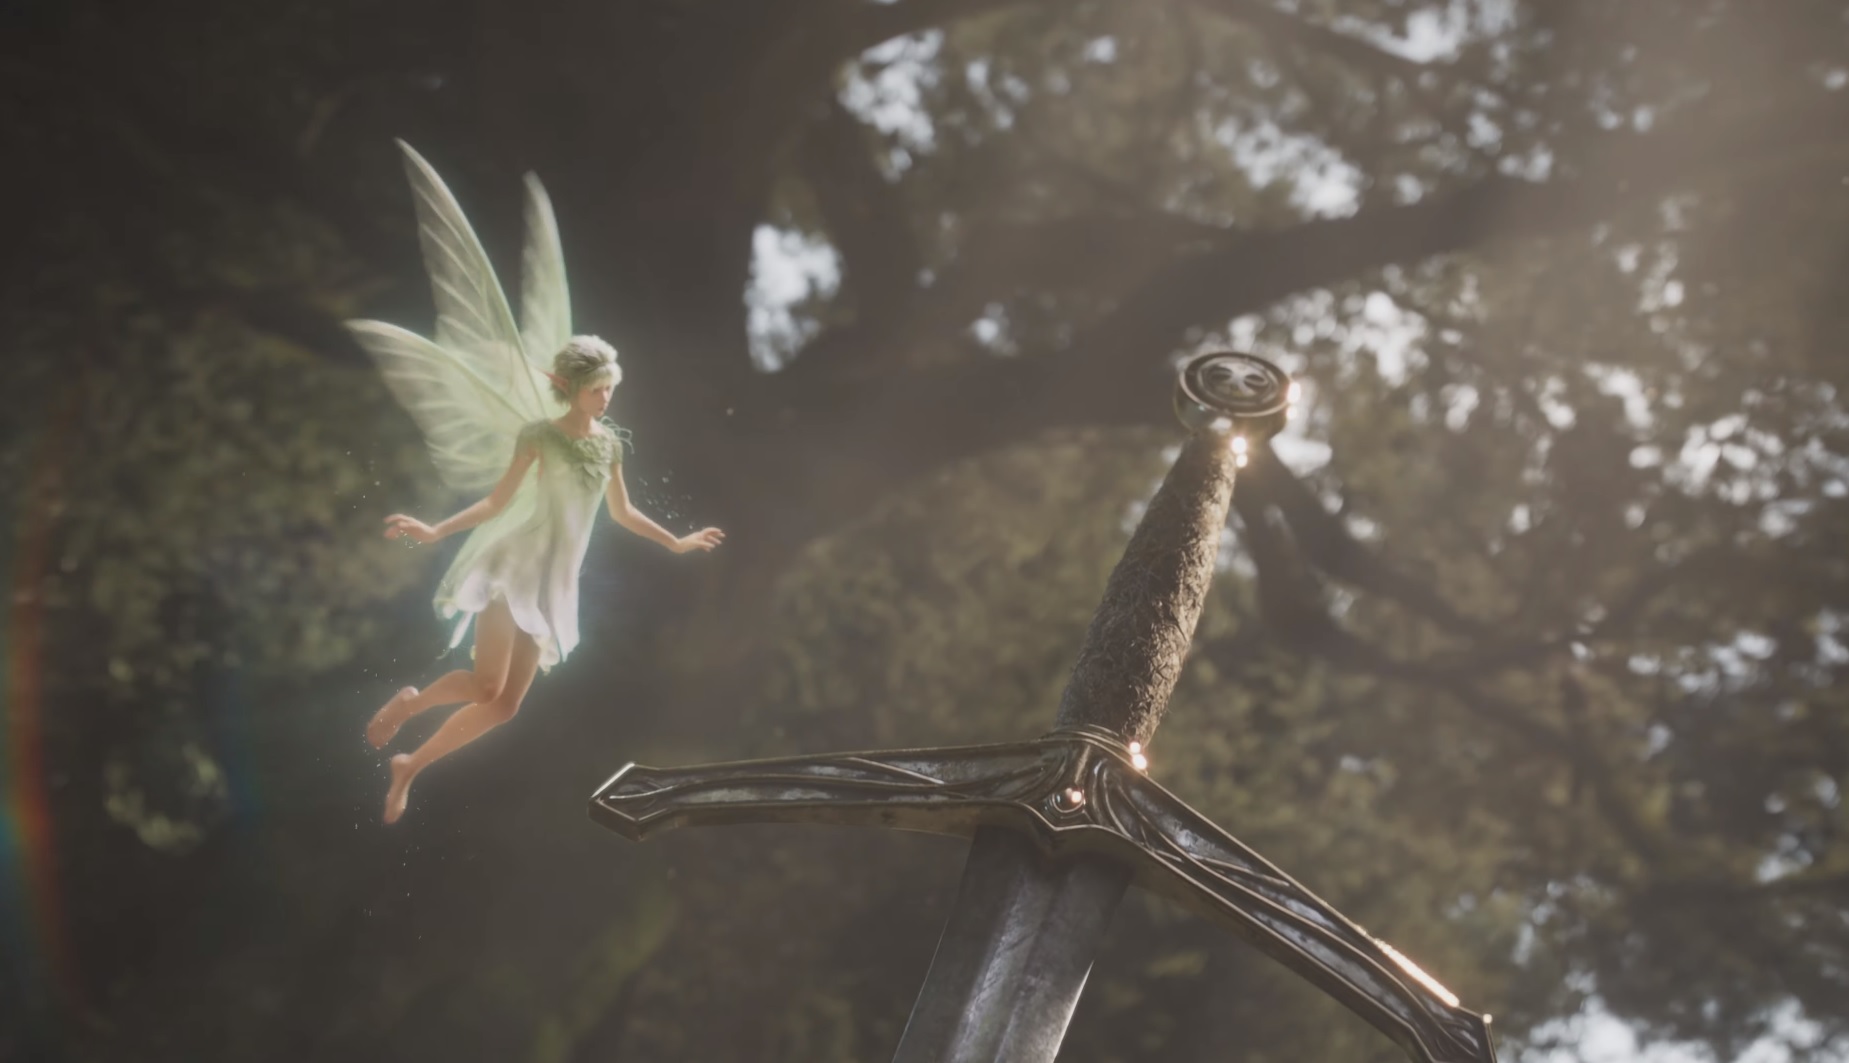 Fable 4 - A fairy hovers near the hilt of a sword stuck into the ground